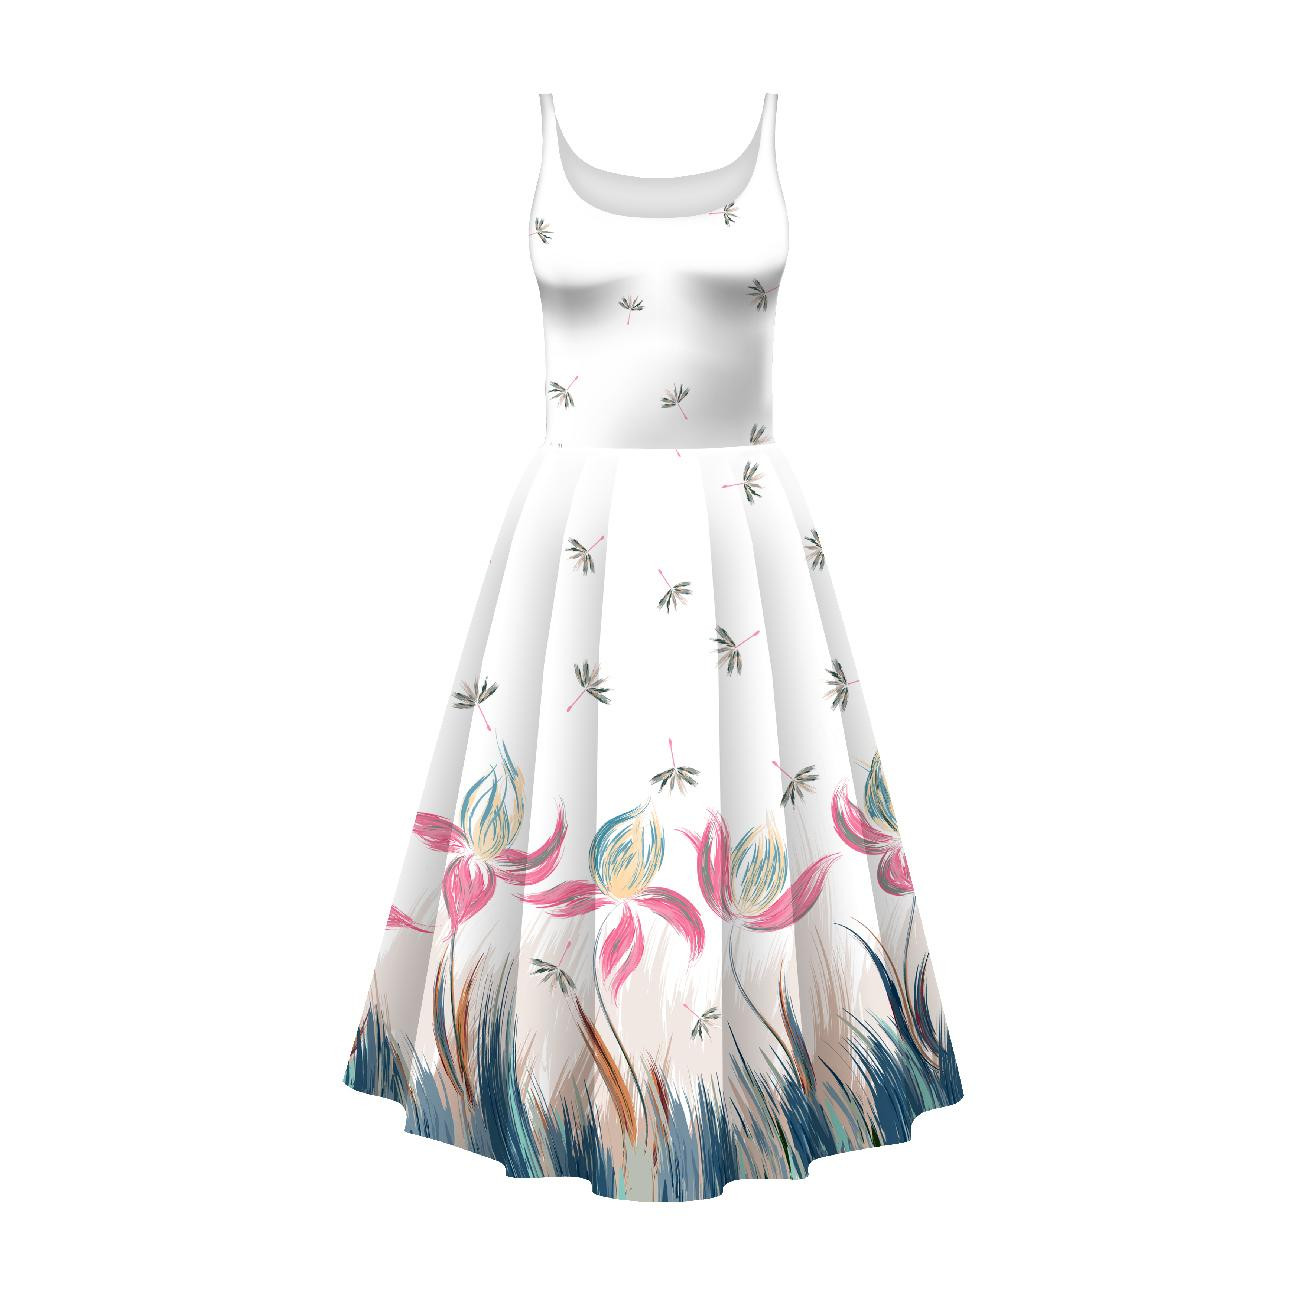 DRESS "ISABELLE" - FLOWERS (pattern no. 4) / white - sewing set